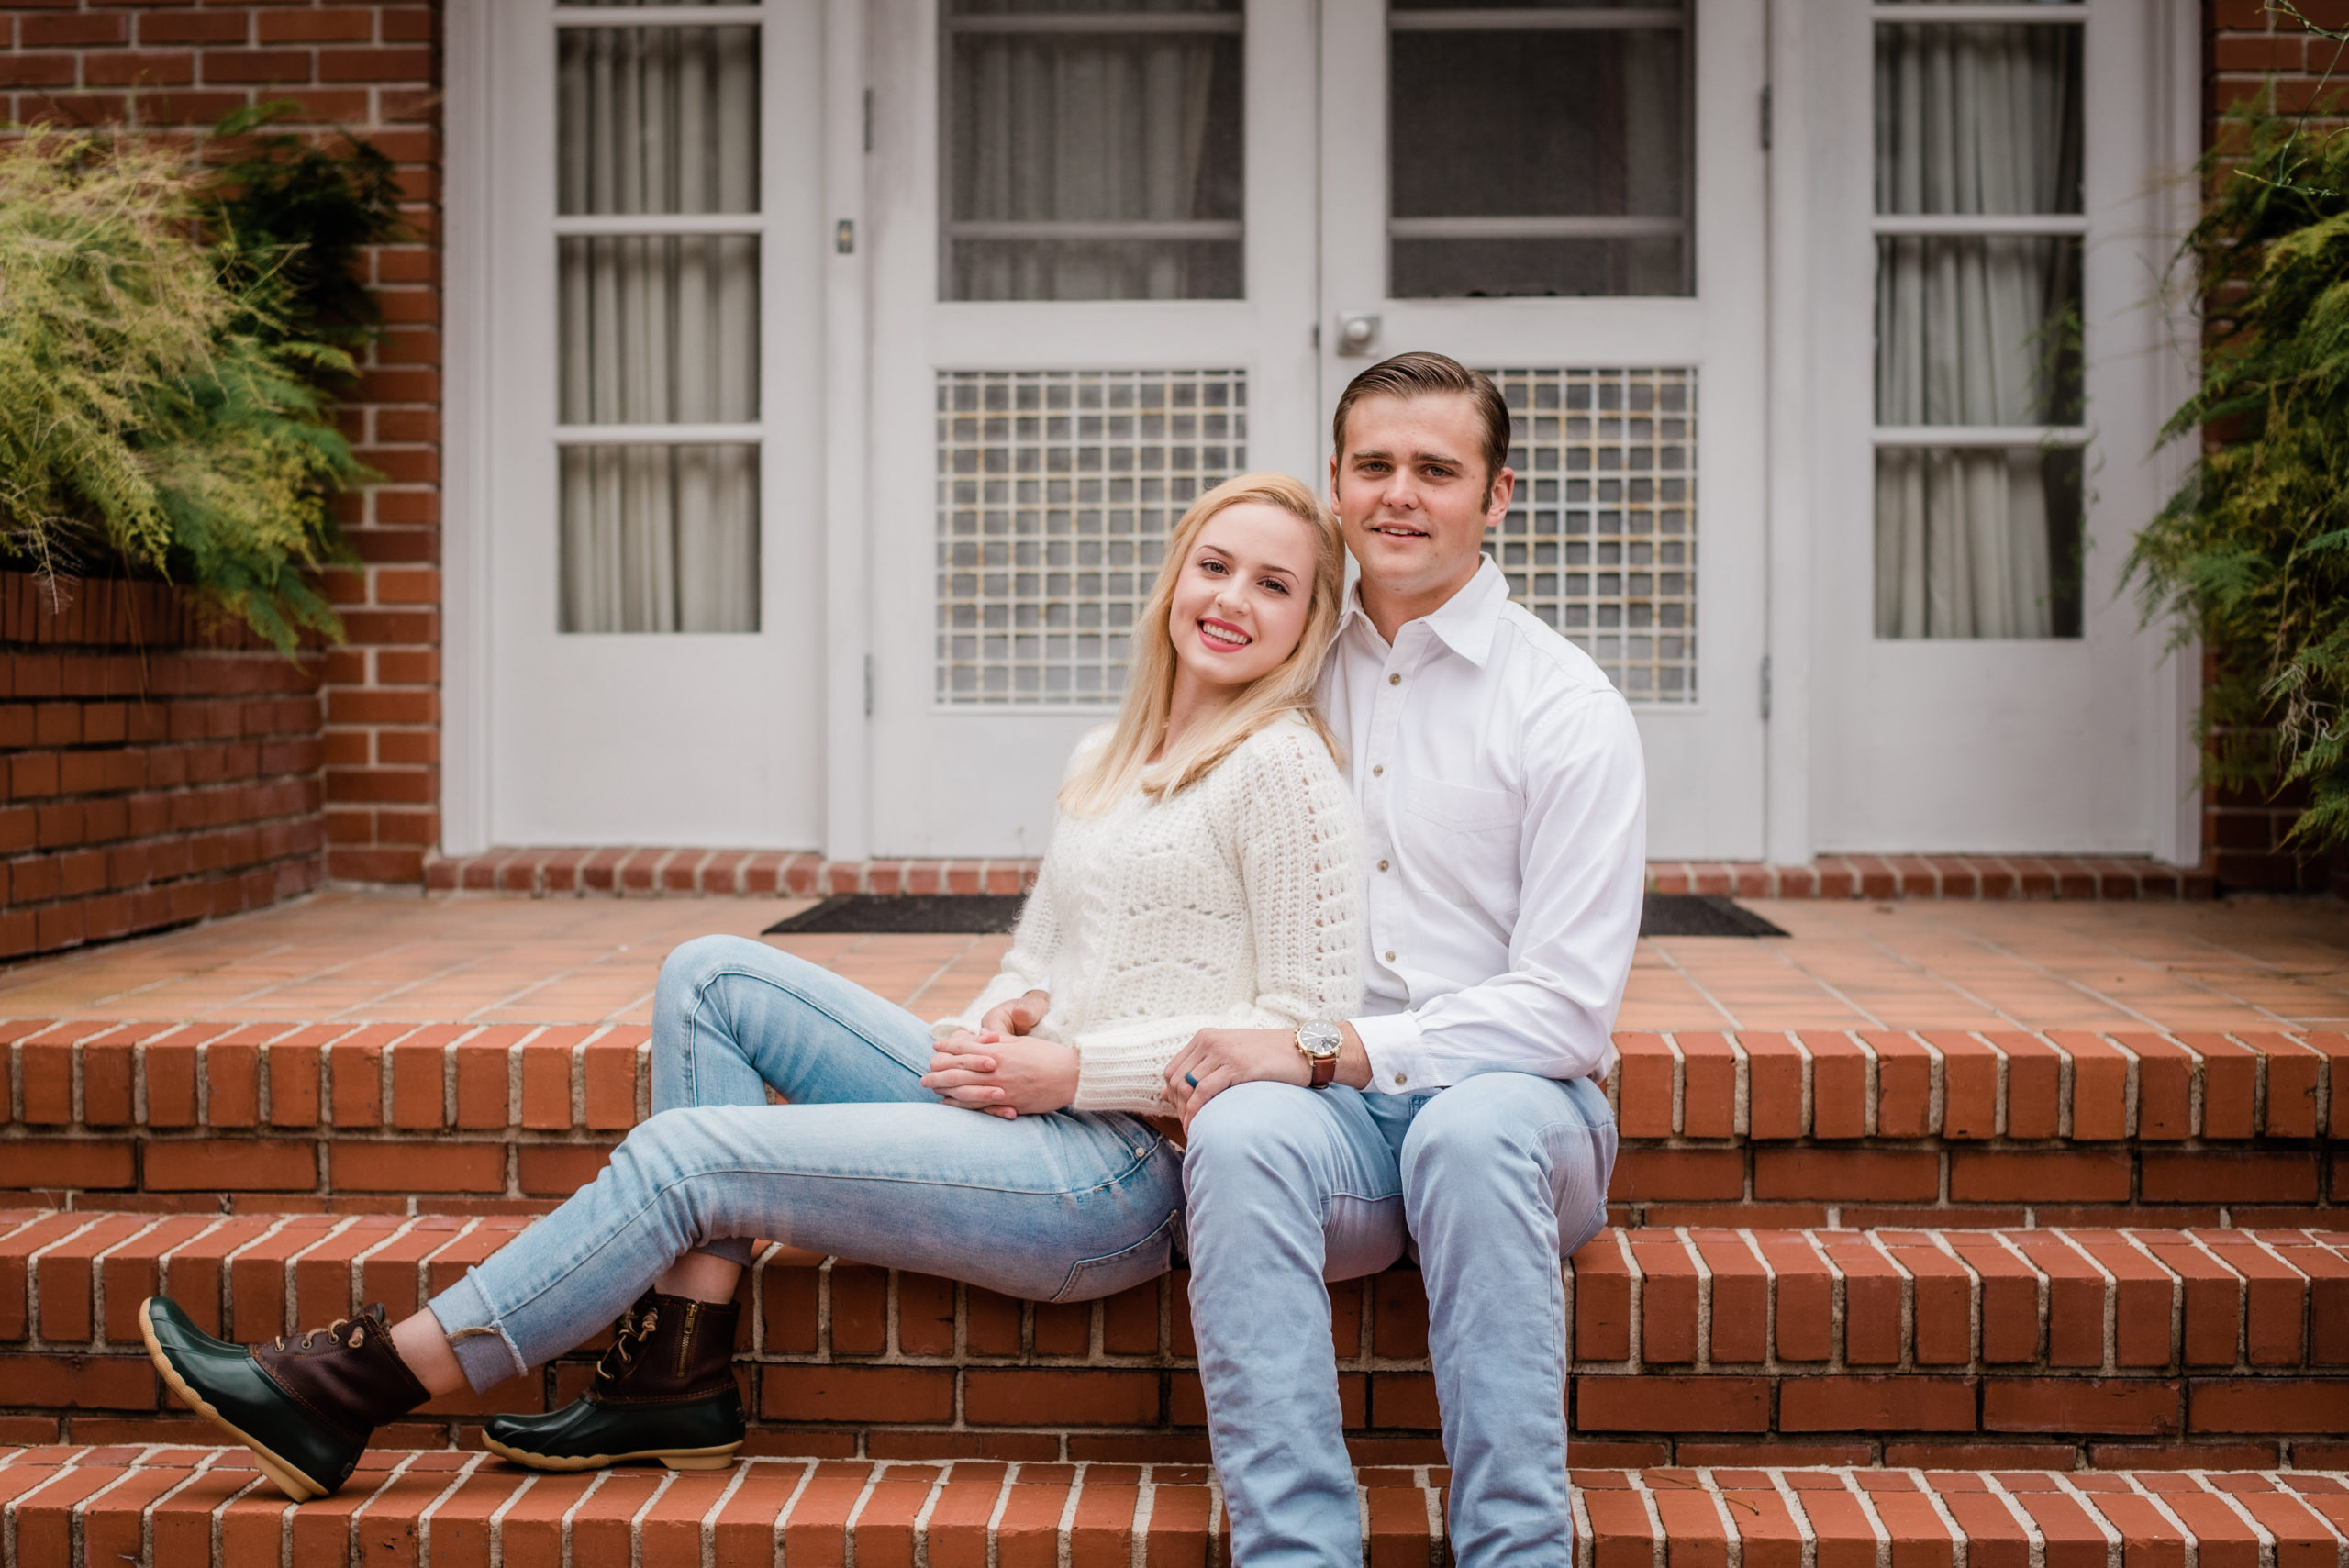 engagement photos at heritage park and gardens in live oak Florida by Black tie and co